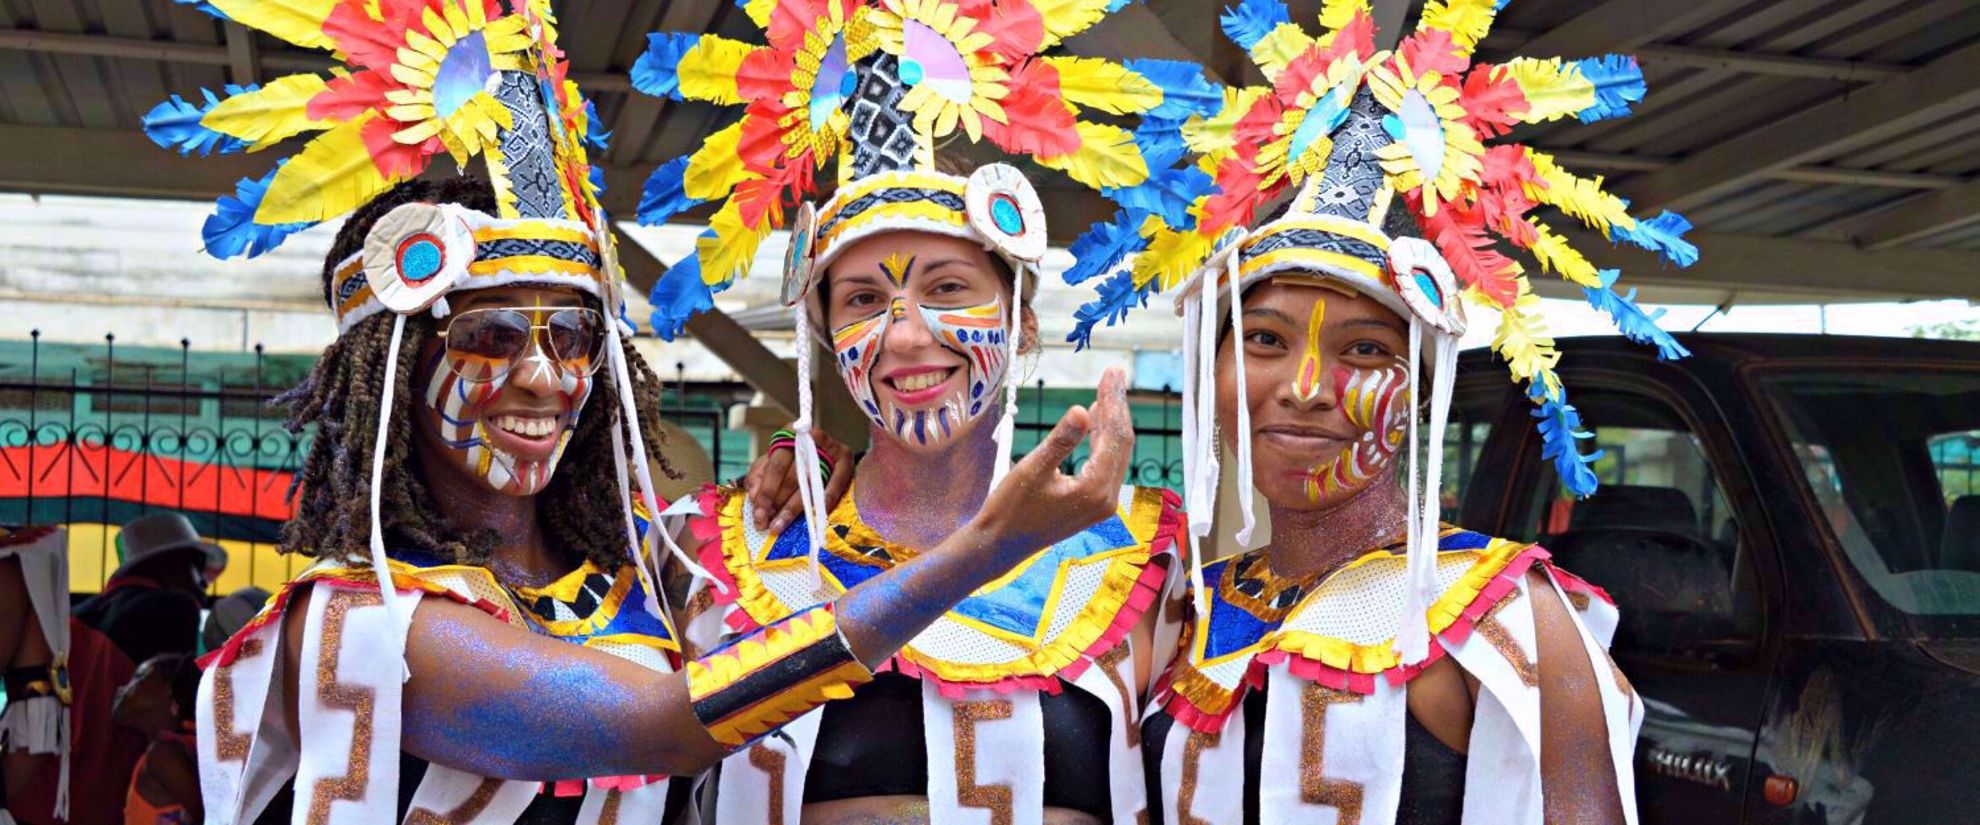 Indigenous people of Guyana sharing their traditional costumes